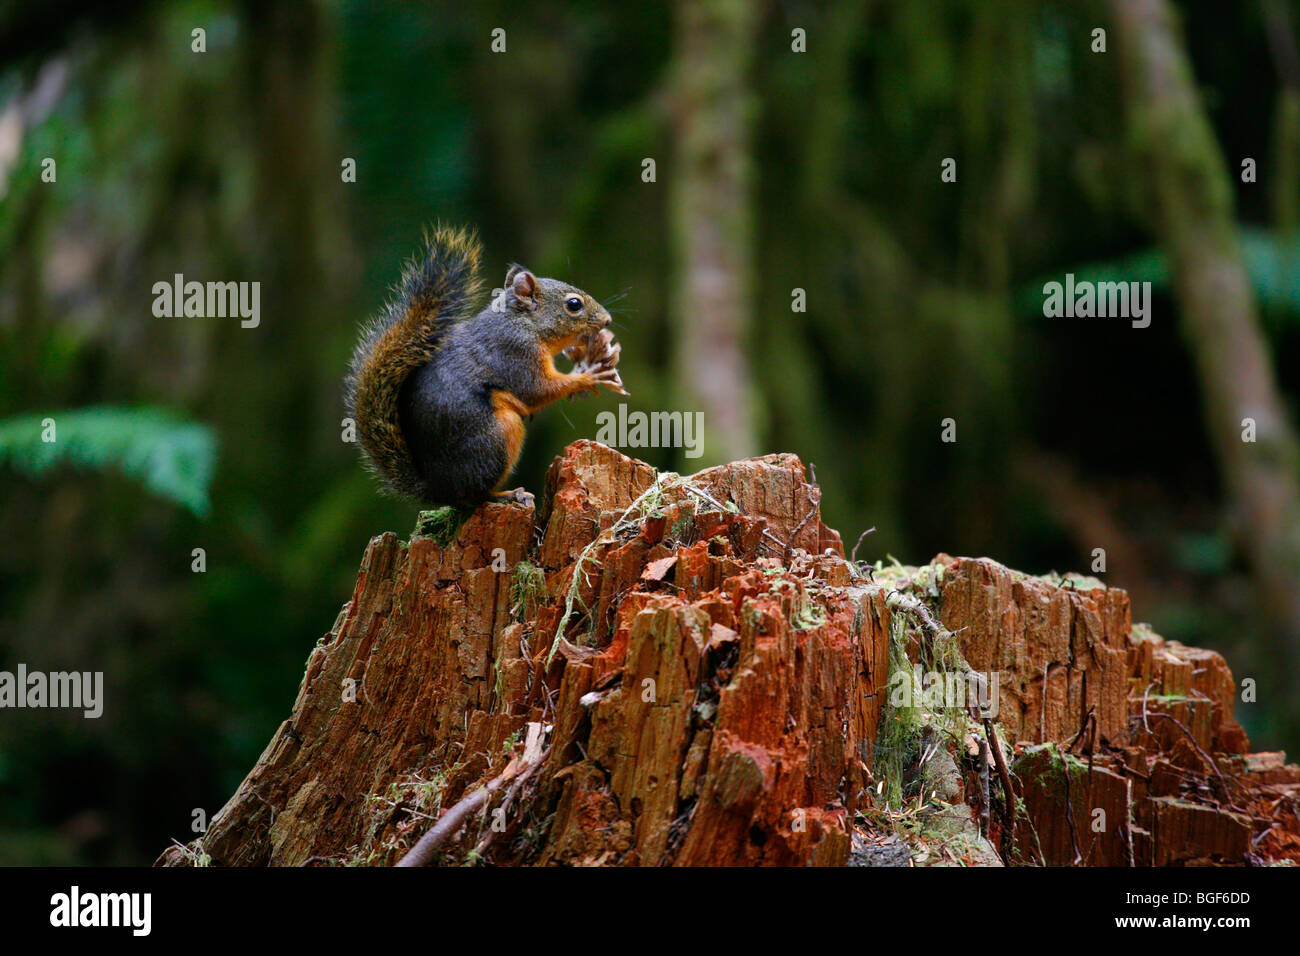 Chipmunk in the forest, Olympic National Park, Washington State. Stock Photo